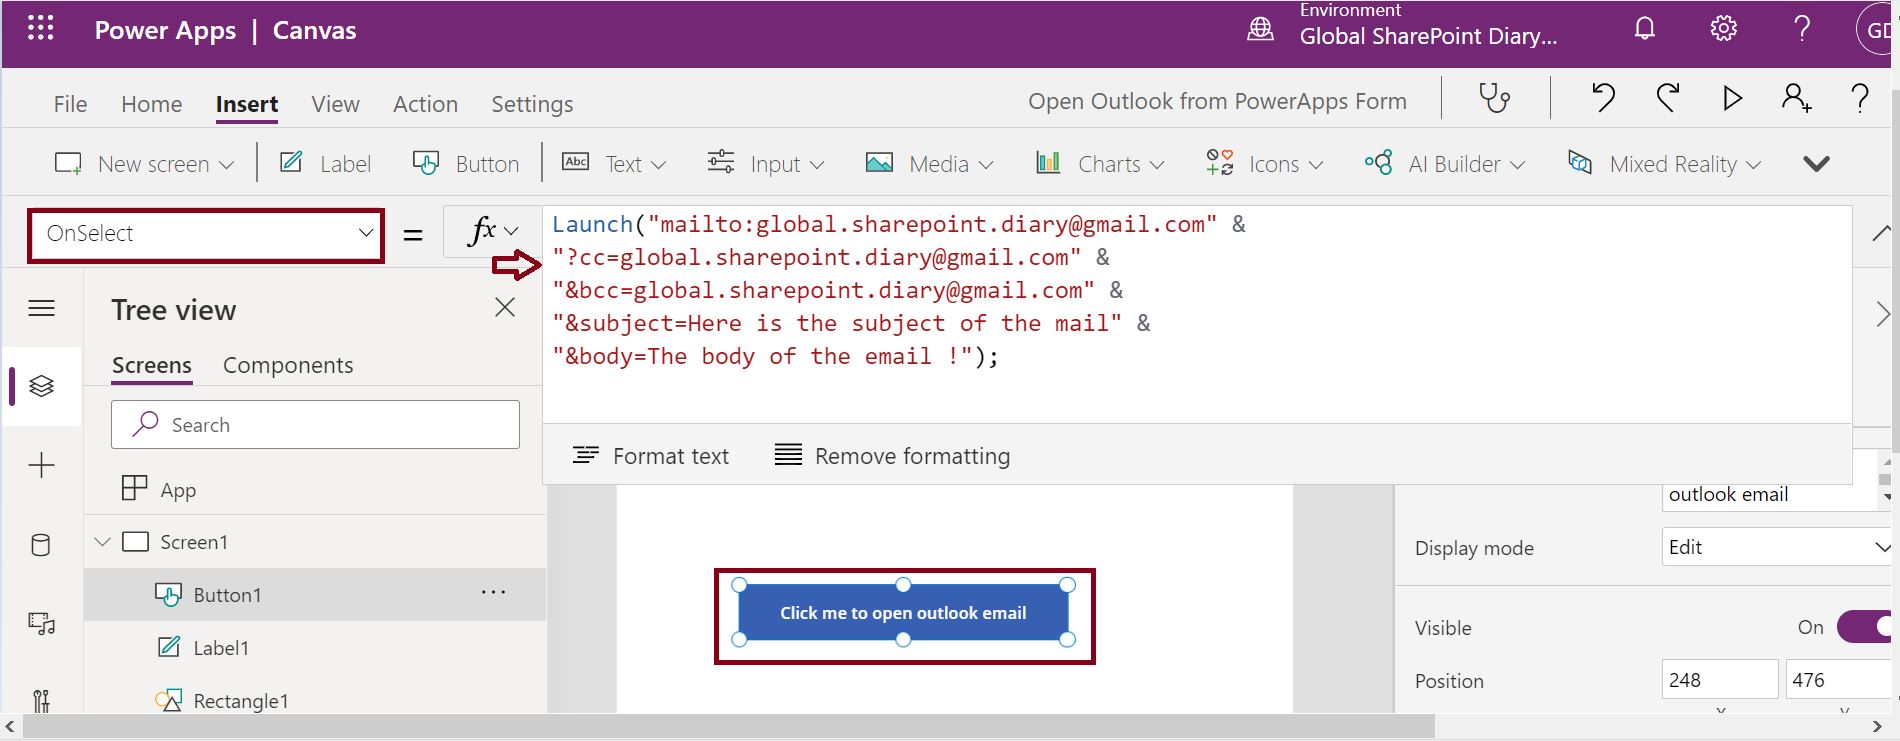 Launch function to open Outlook in PowerApps